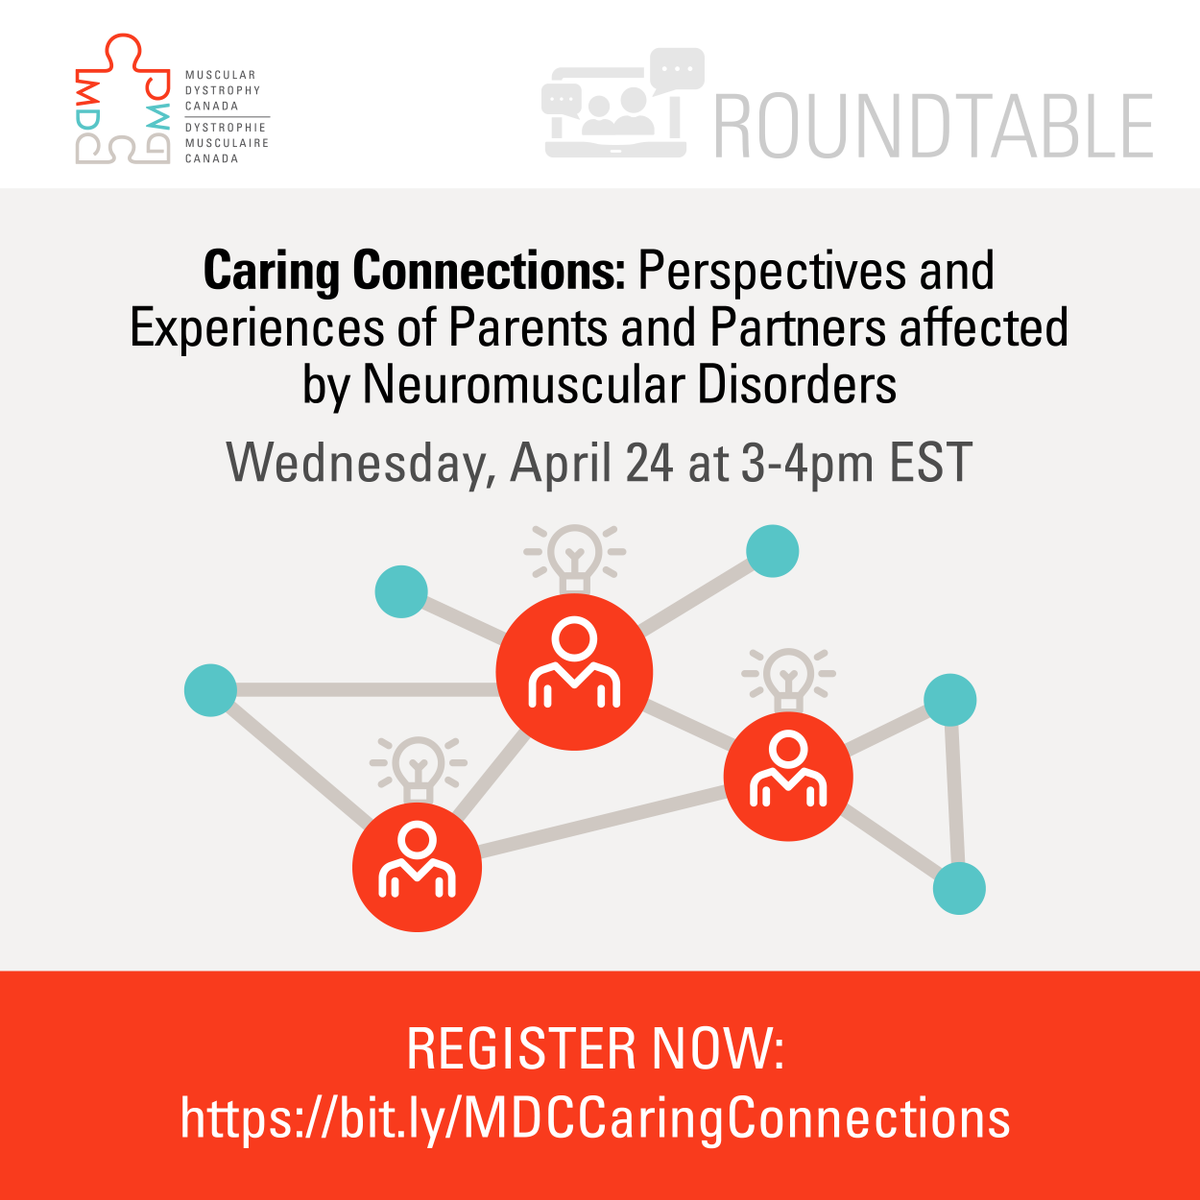 If you're a caregiver to someone who has a neuromuscular disorder (NMD), what comes to mind when you reflect on your journey? Join us on April 24 for an insightful discussion, welcoming parents, siblings, or partners of individuals affected by NMDs. 🔗 bit.ly/MDCCaringConne…